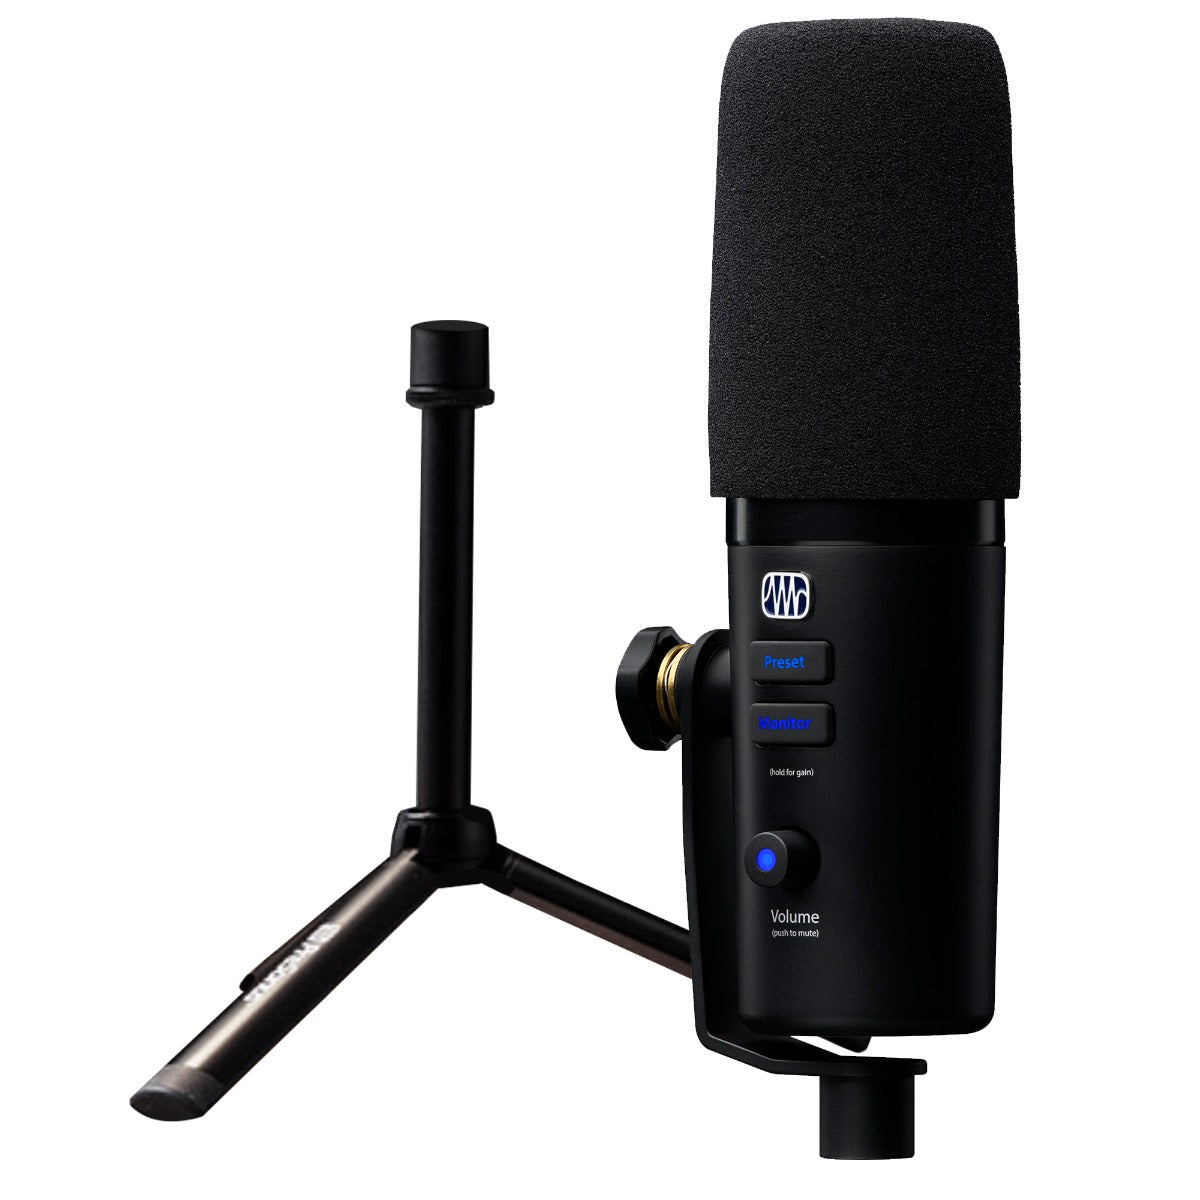 PreSonus Revelator Dynamic USB Microphone with included stand